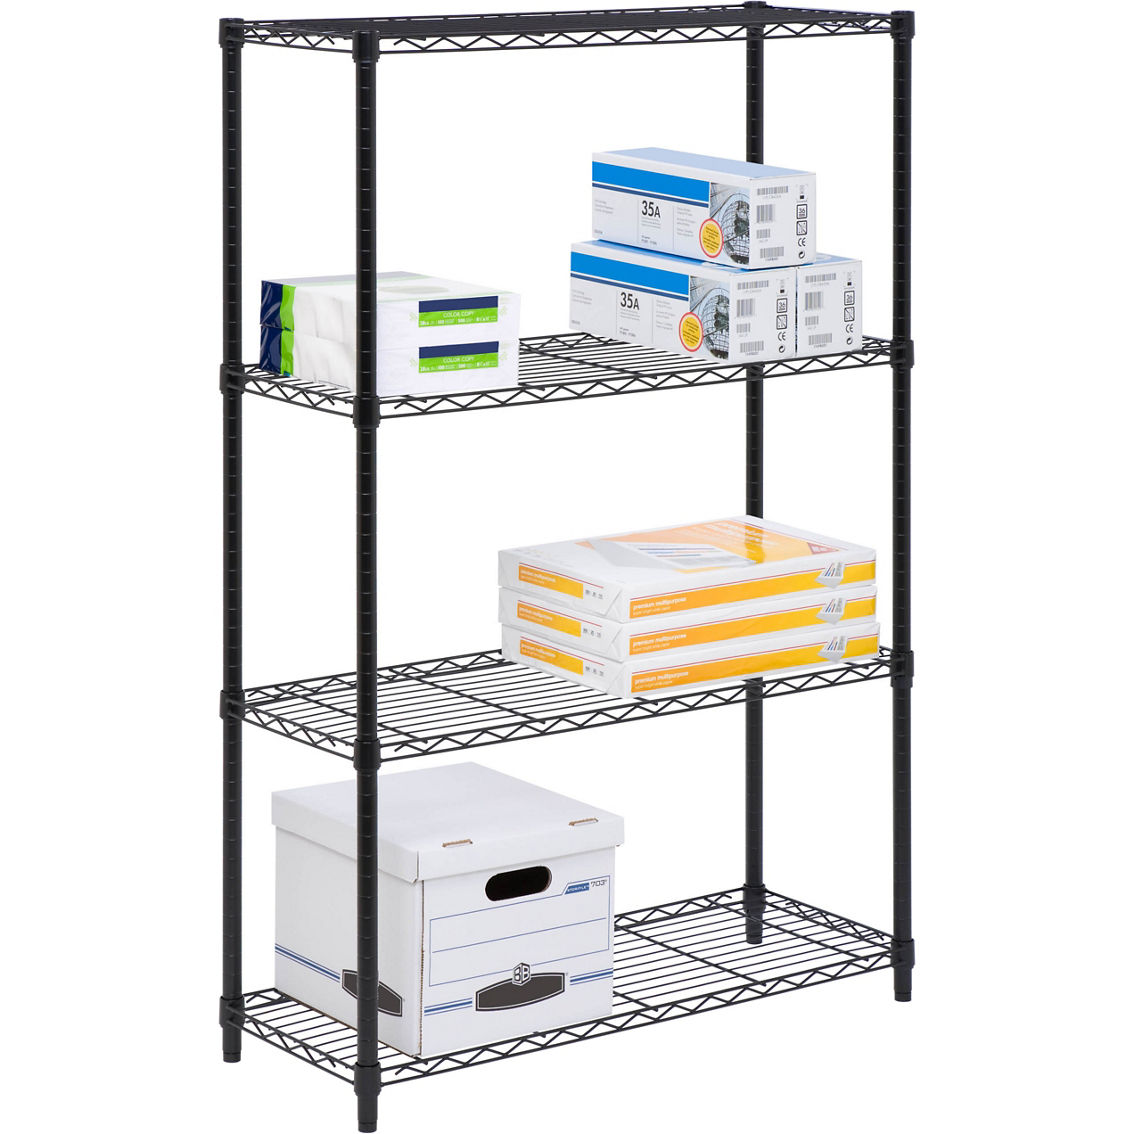 Honey Can Do 4 Tier Heavy Duty Adjustable Shelving Unit - Image 2 of 2